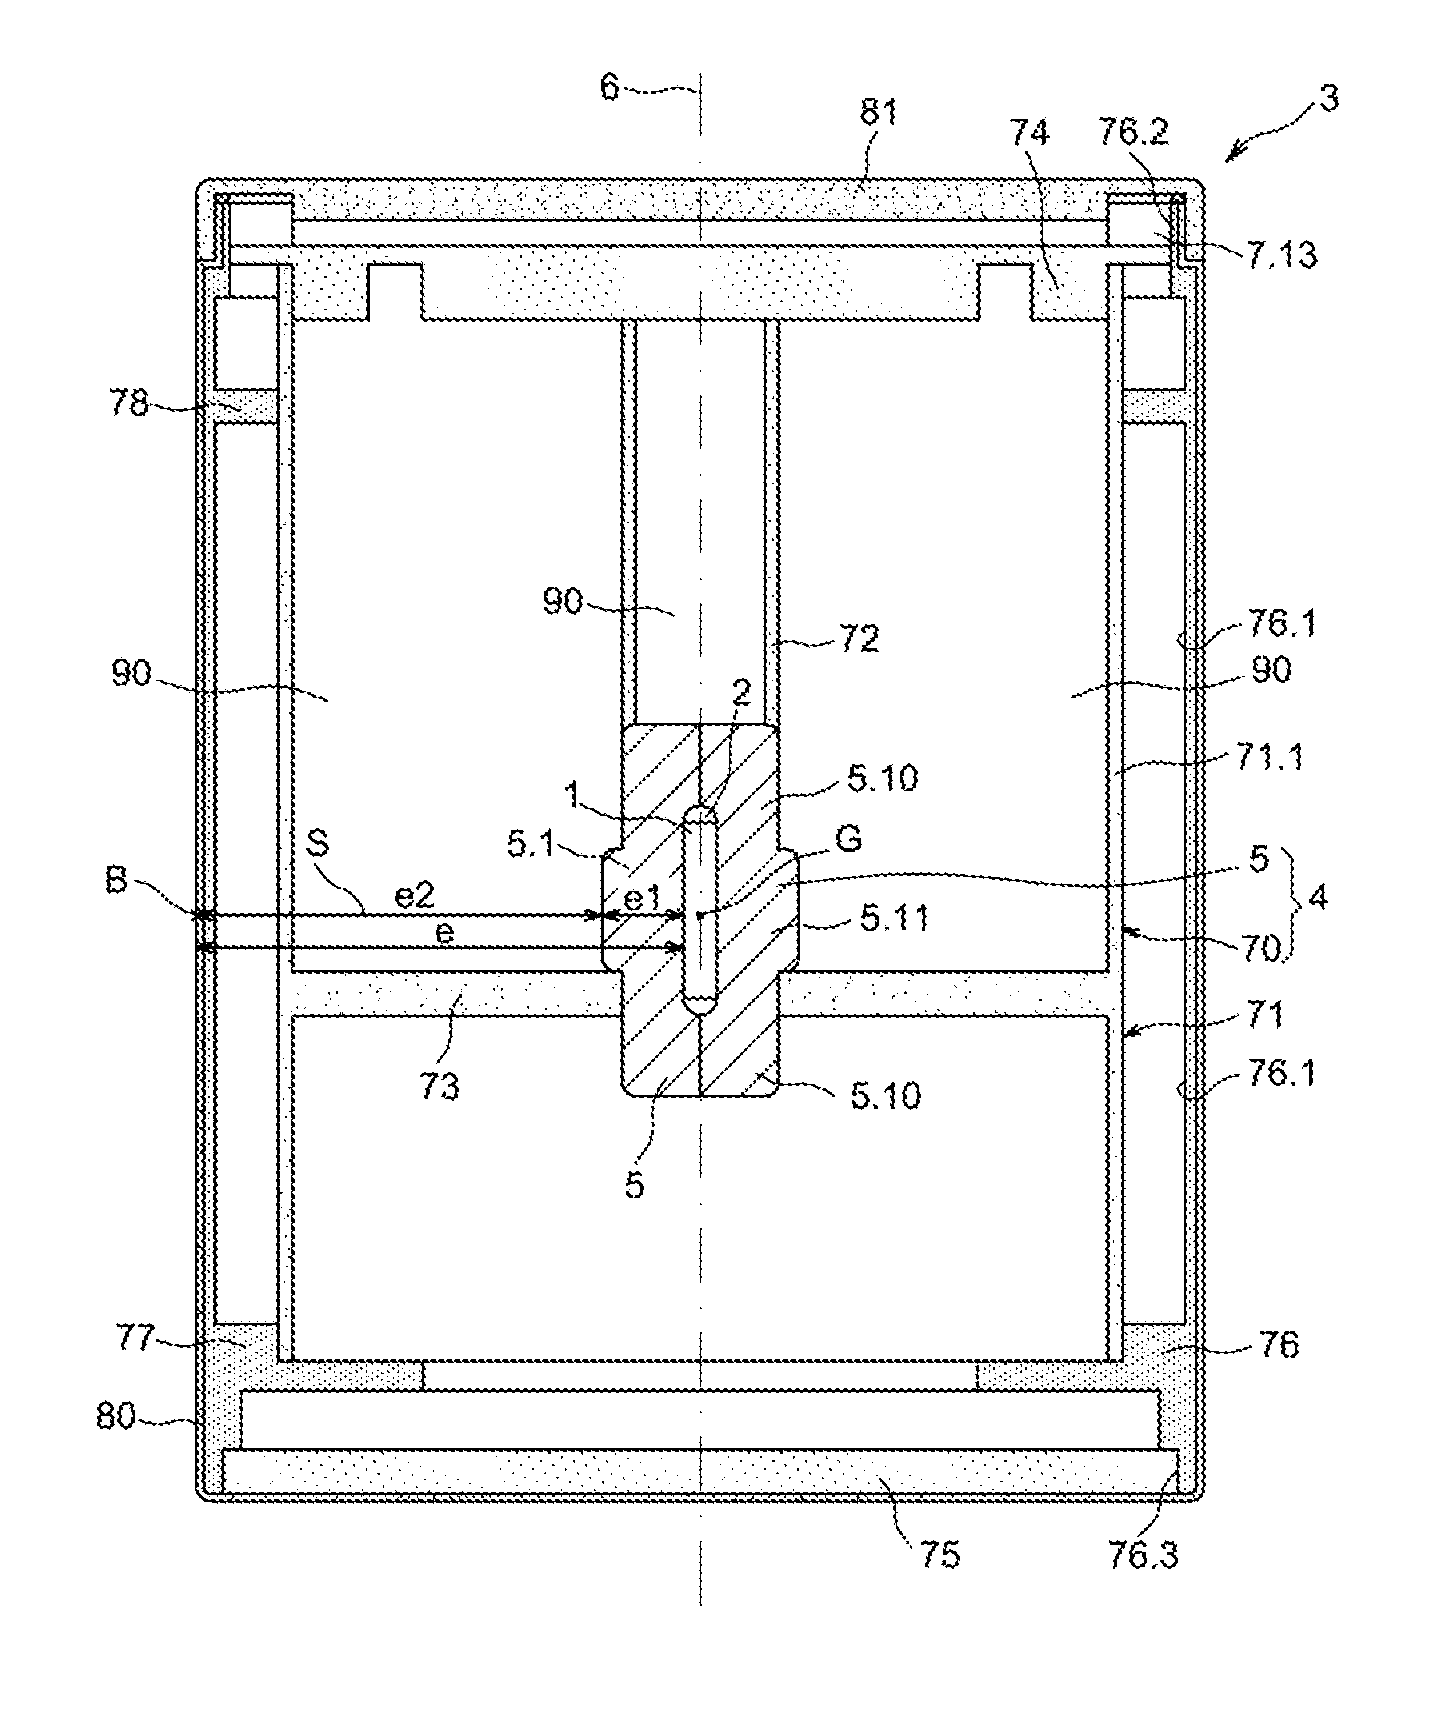 Packaging for transporting and/or storing radioactive material